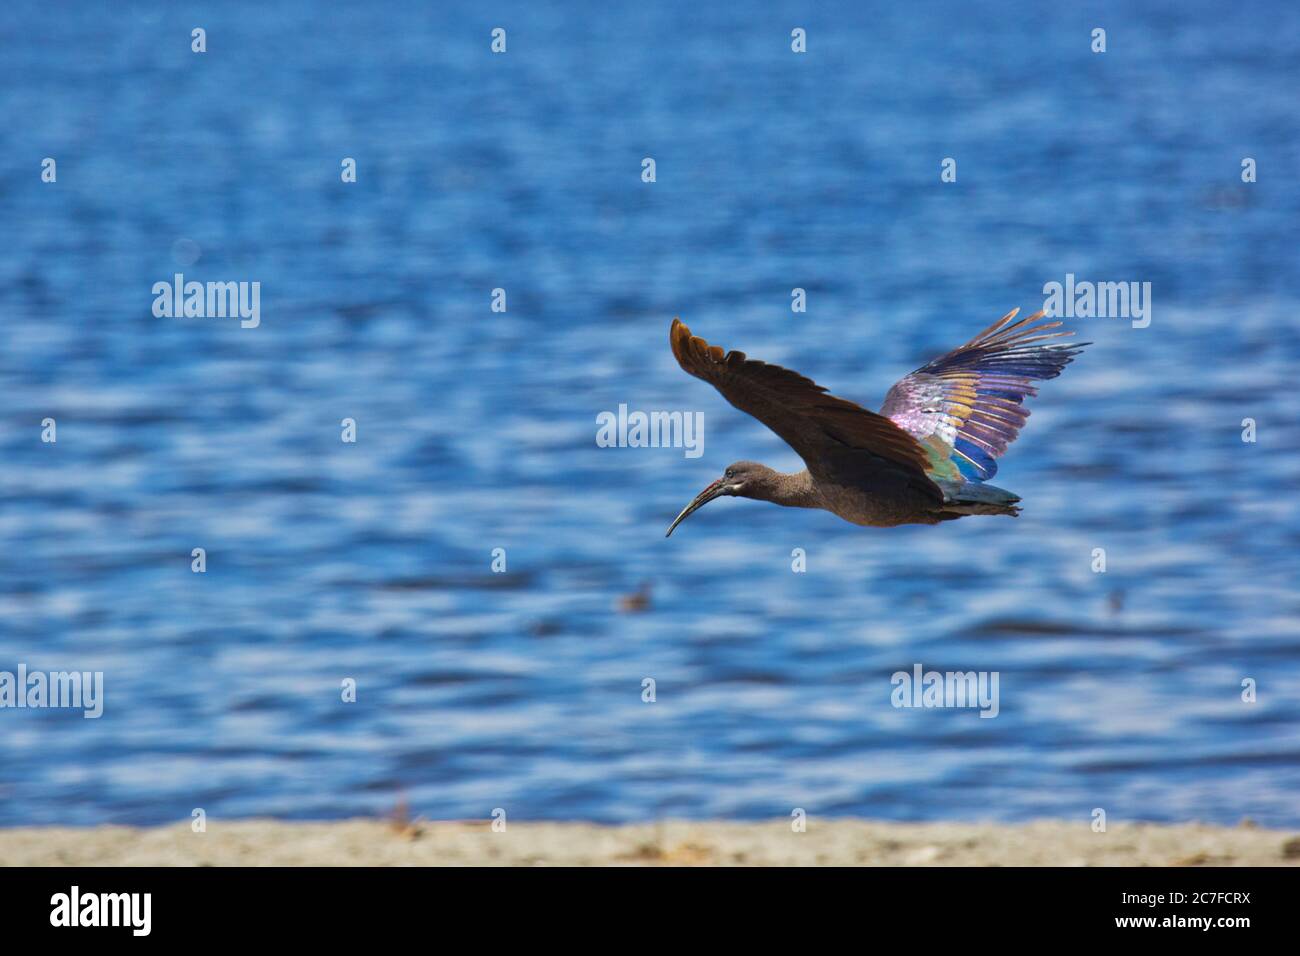 Hadeda ibis (Bostrychia hagedash) in flight. This is a wading bird with long legs, a long neck and a long bill for feeding on insects, crustaceans, sp Stock Photo